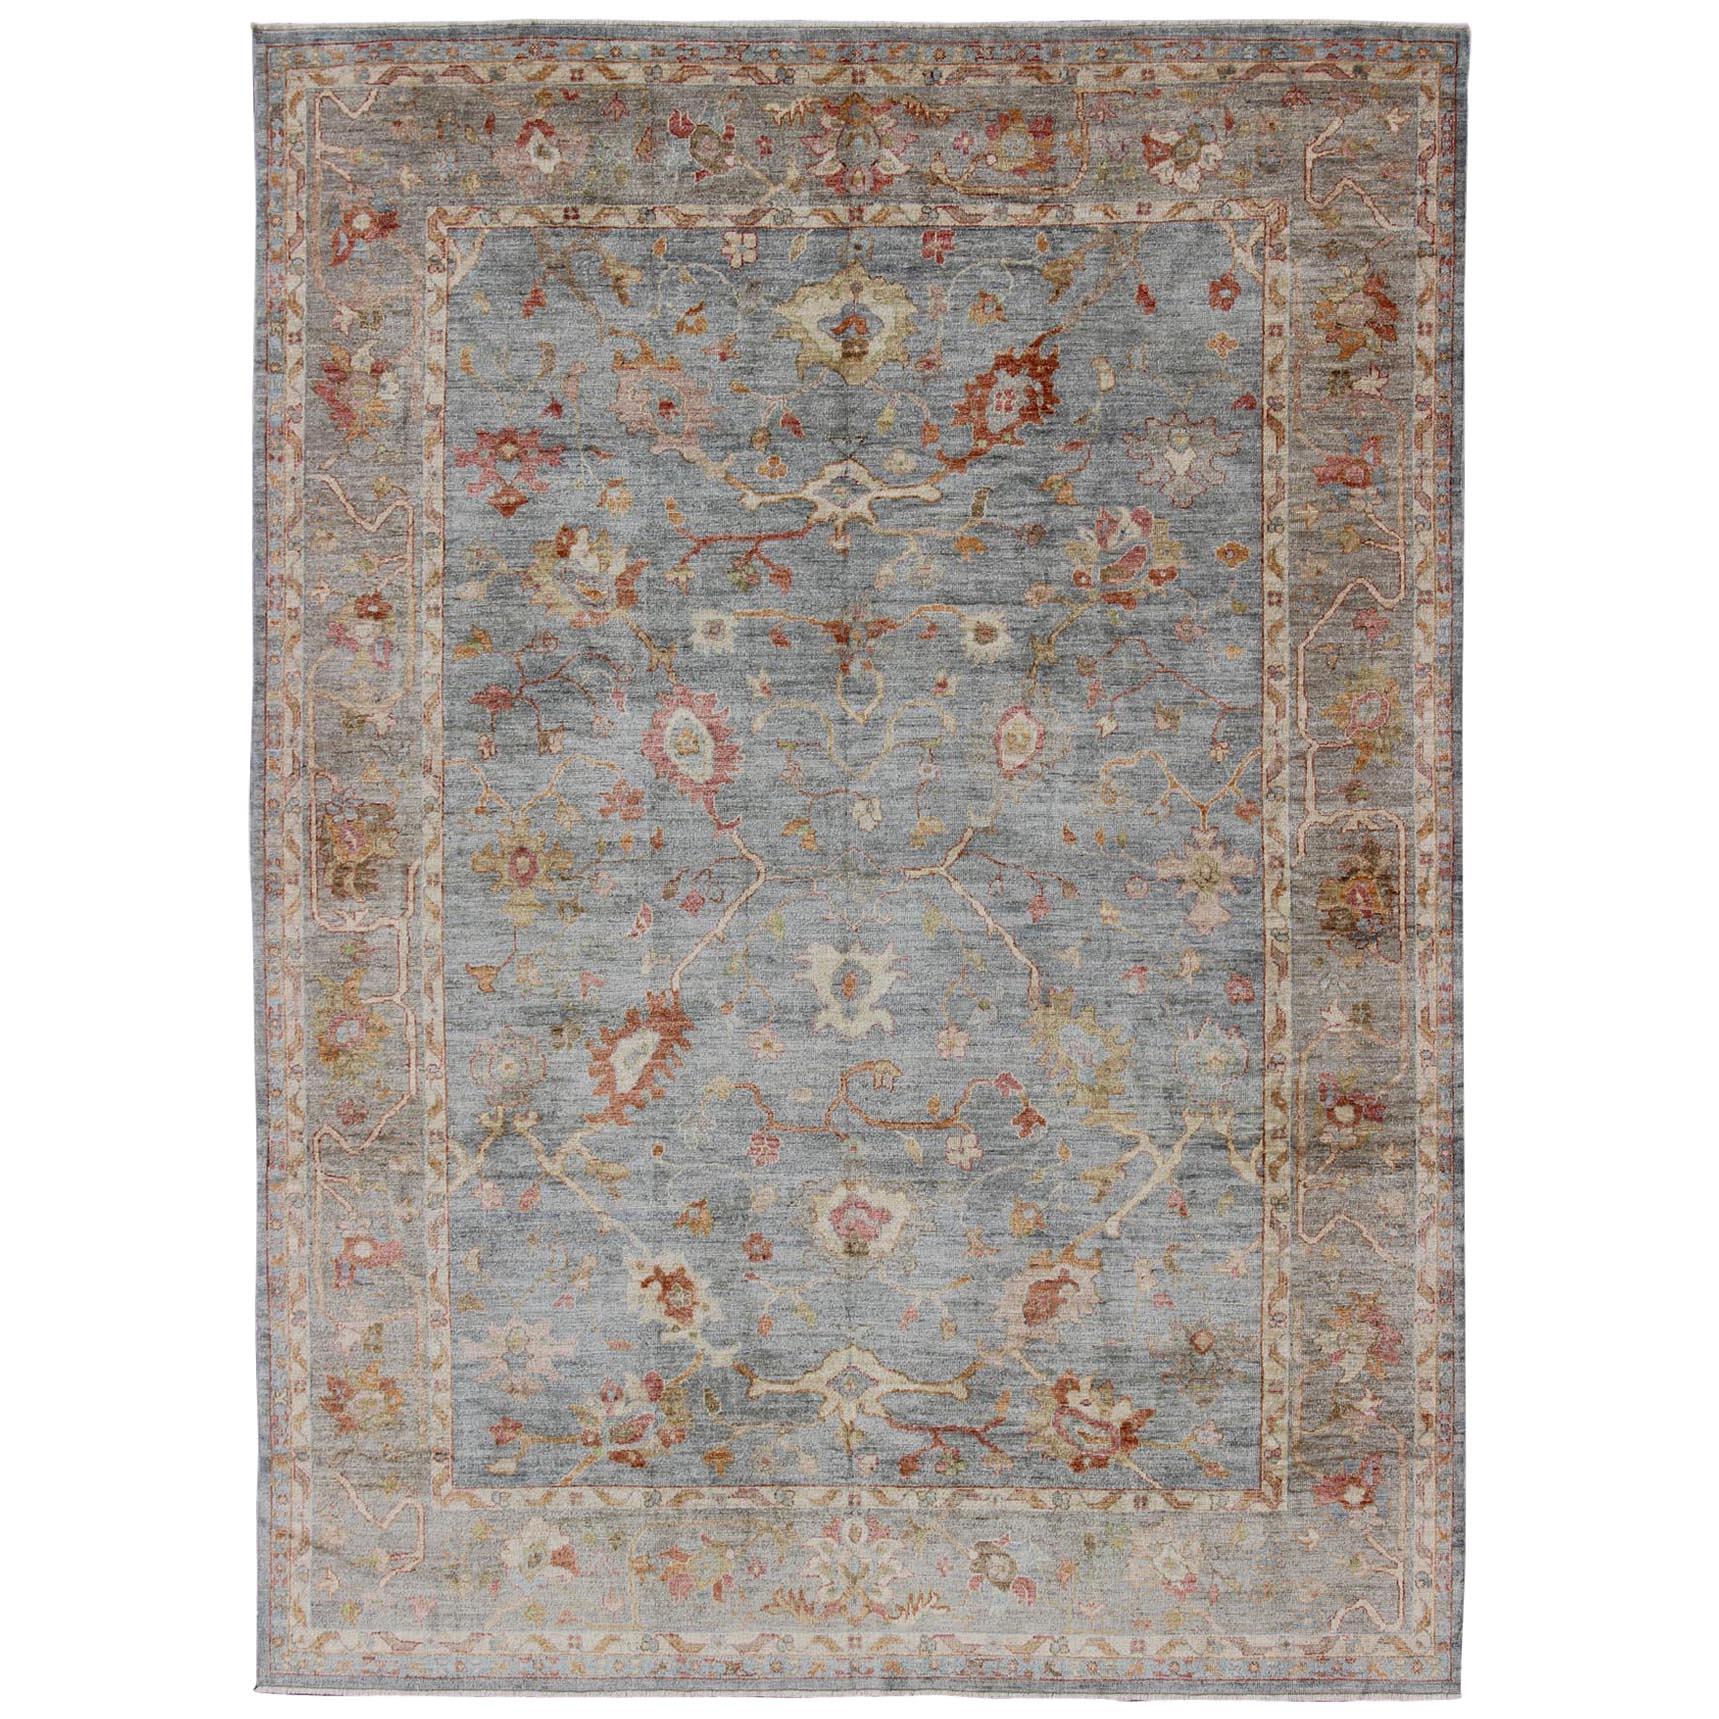 Angora Turkish Oushak Large Rug in Gray, Light Blue, and Coral